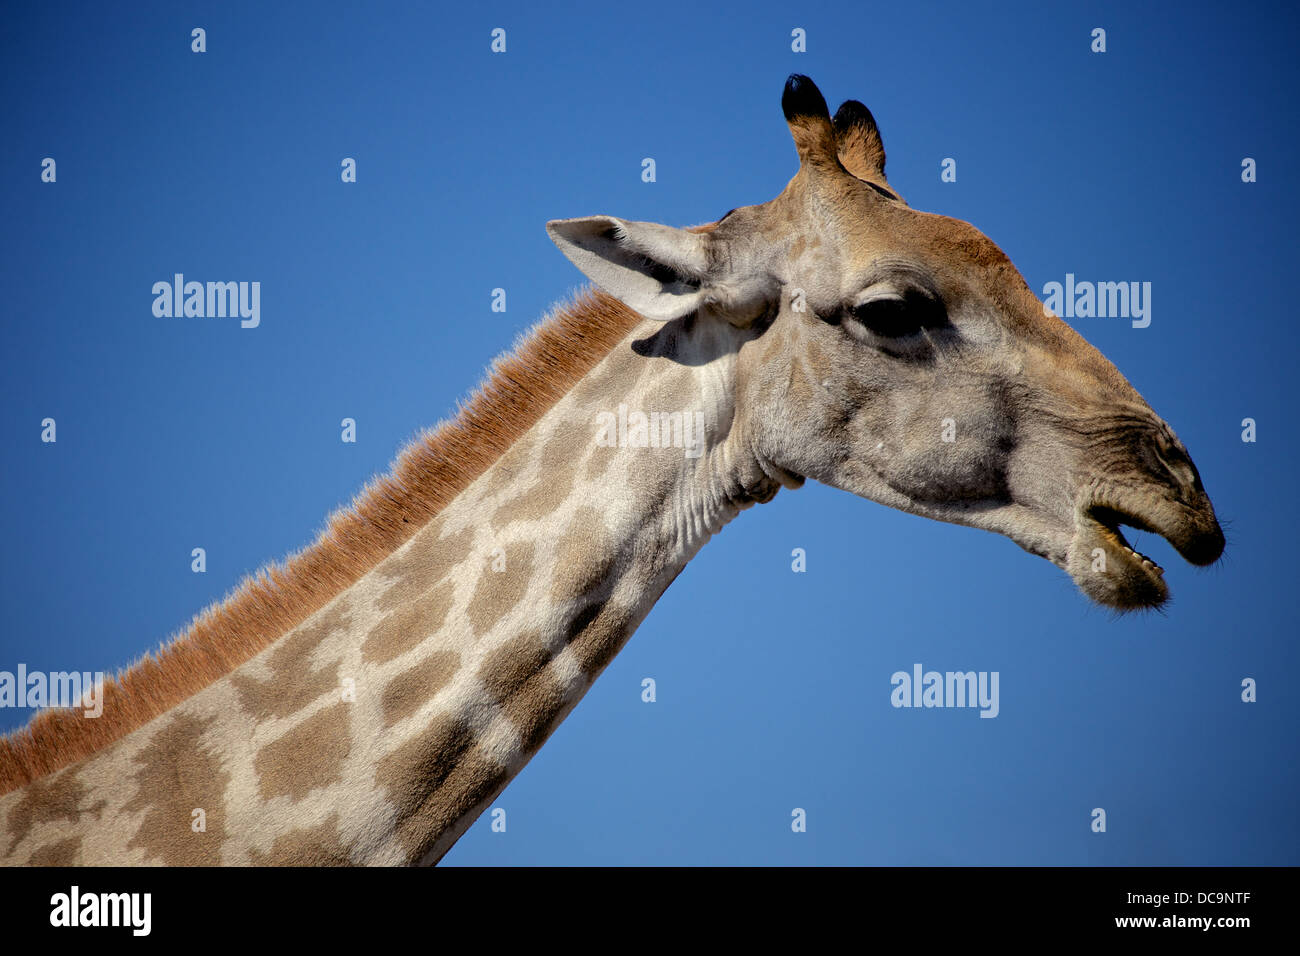 Giraffe with open mouth Stock Photo